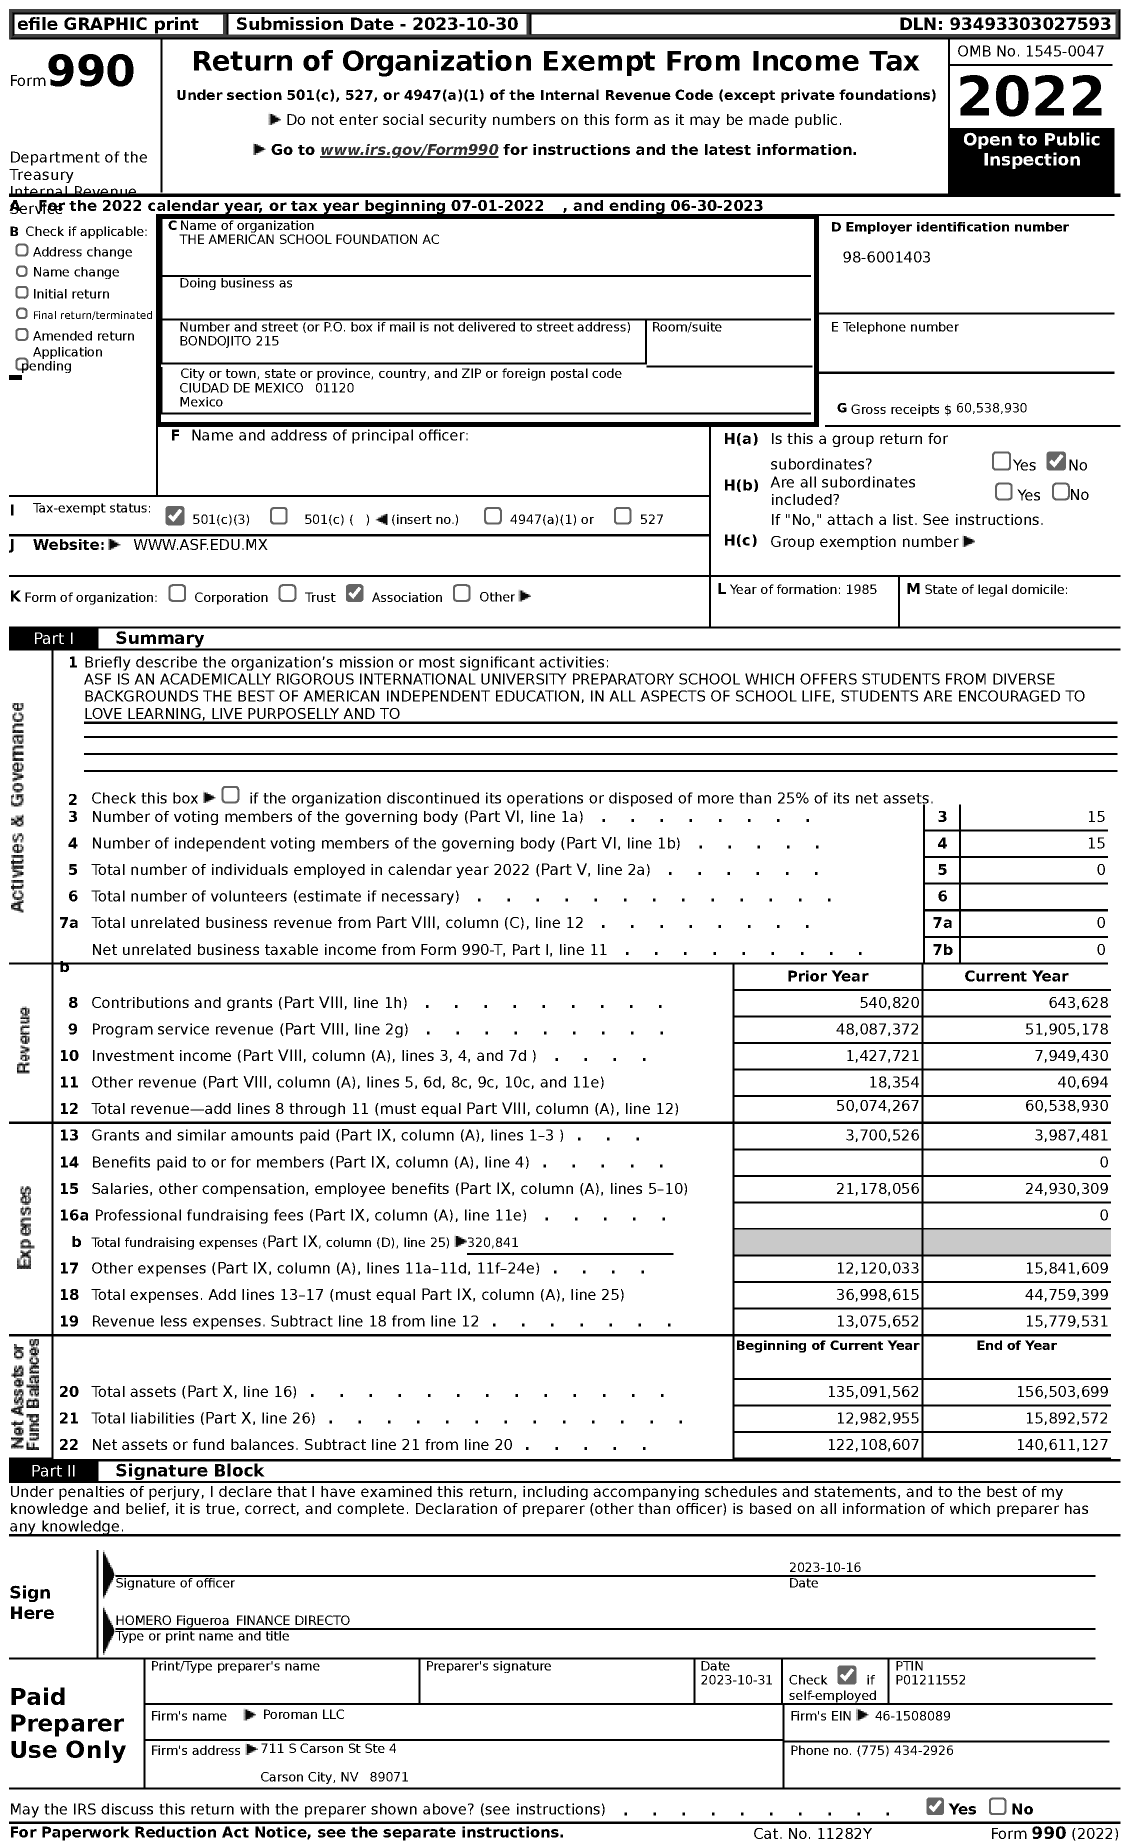 Image of first page of 2022 Form 990 for The American School Foundation Ac (ASF)